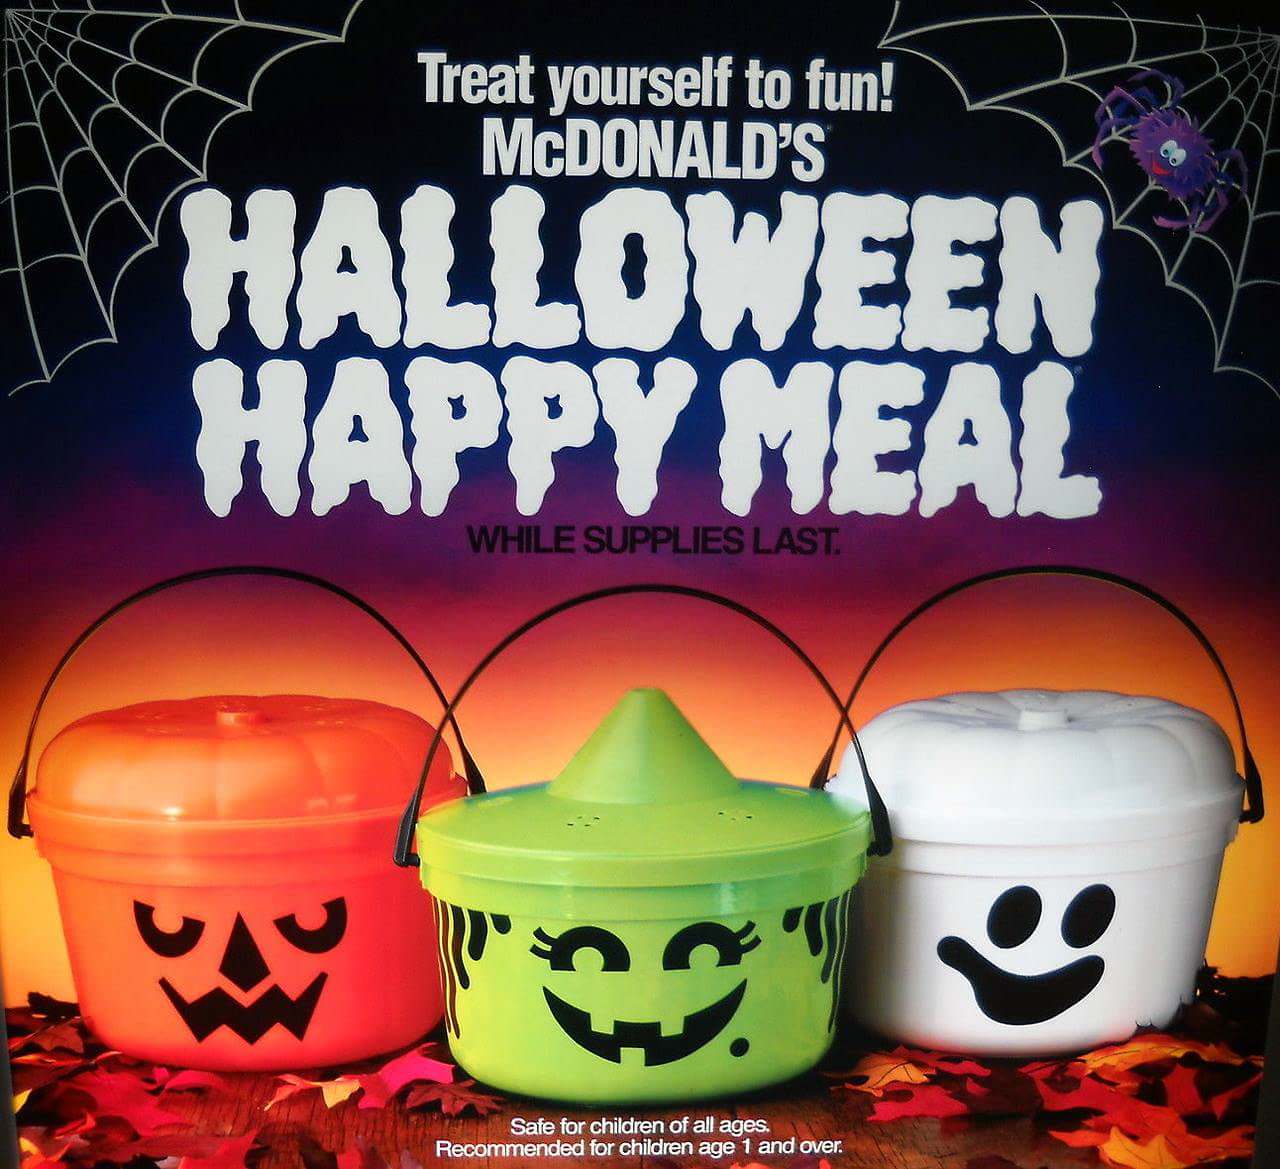 mcdonald halloween - Treat yourself to fun! Mcdonald'S Halloween Happy Meal While Supplies Last Safe for children of all ages. Recommended for children age 1 and over.